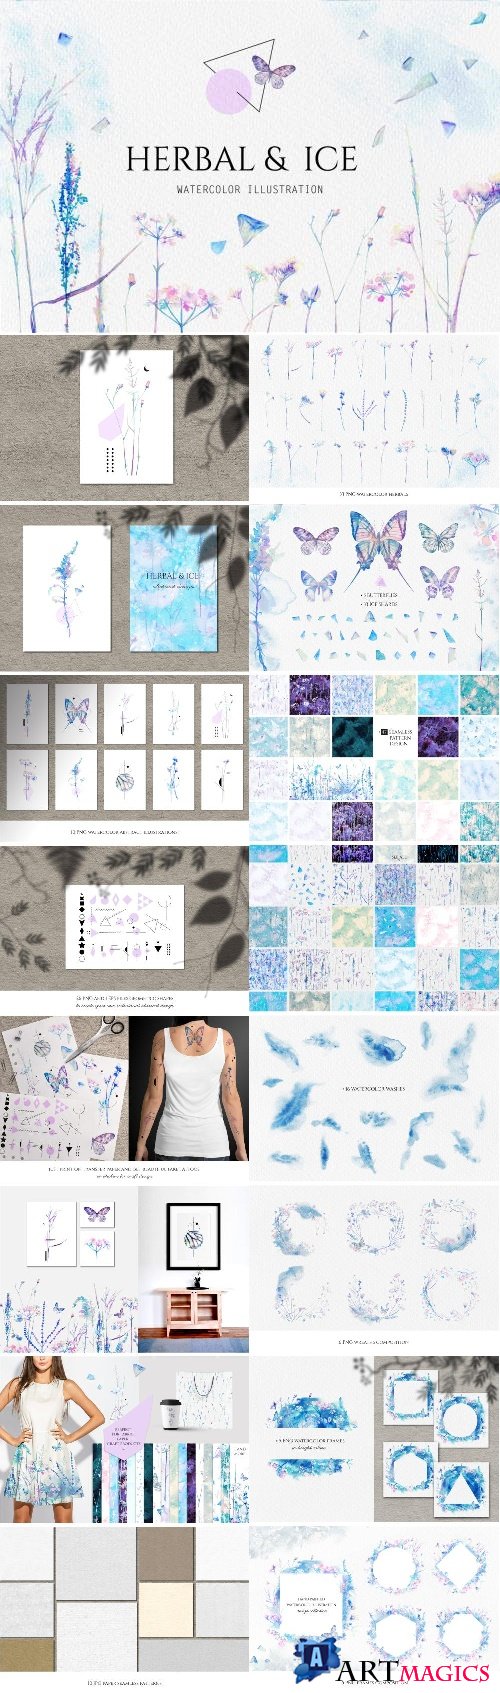 Watercolor floral design collection, herbal and ice - 153959